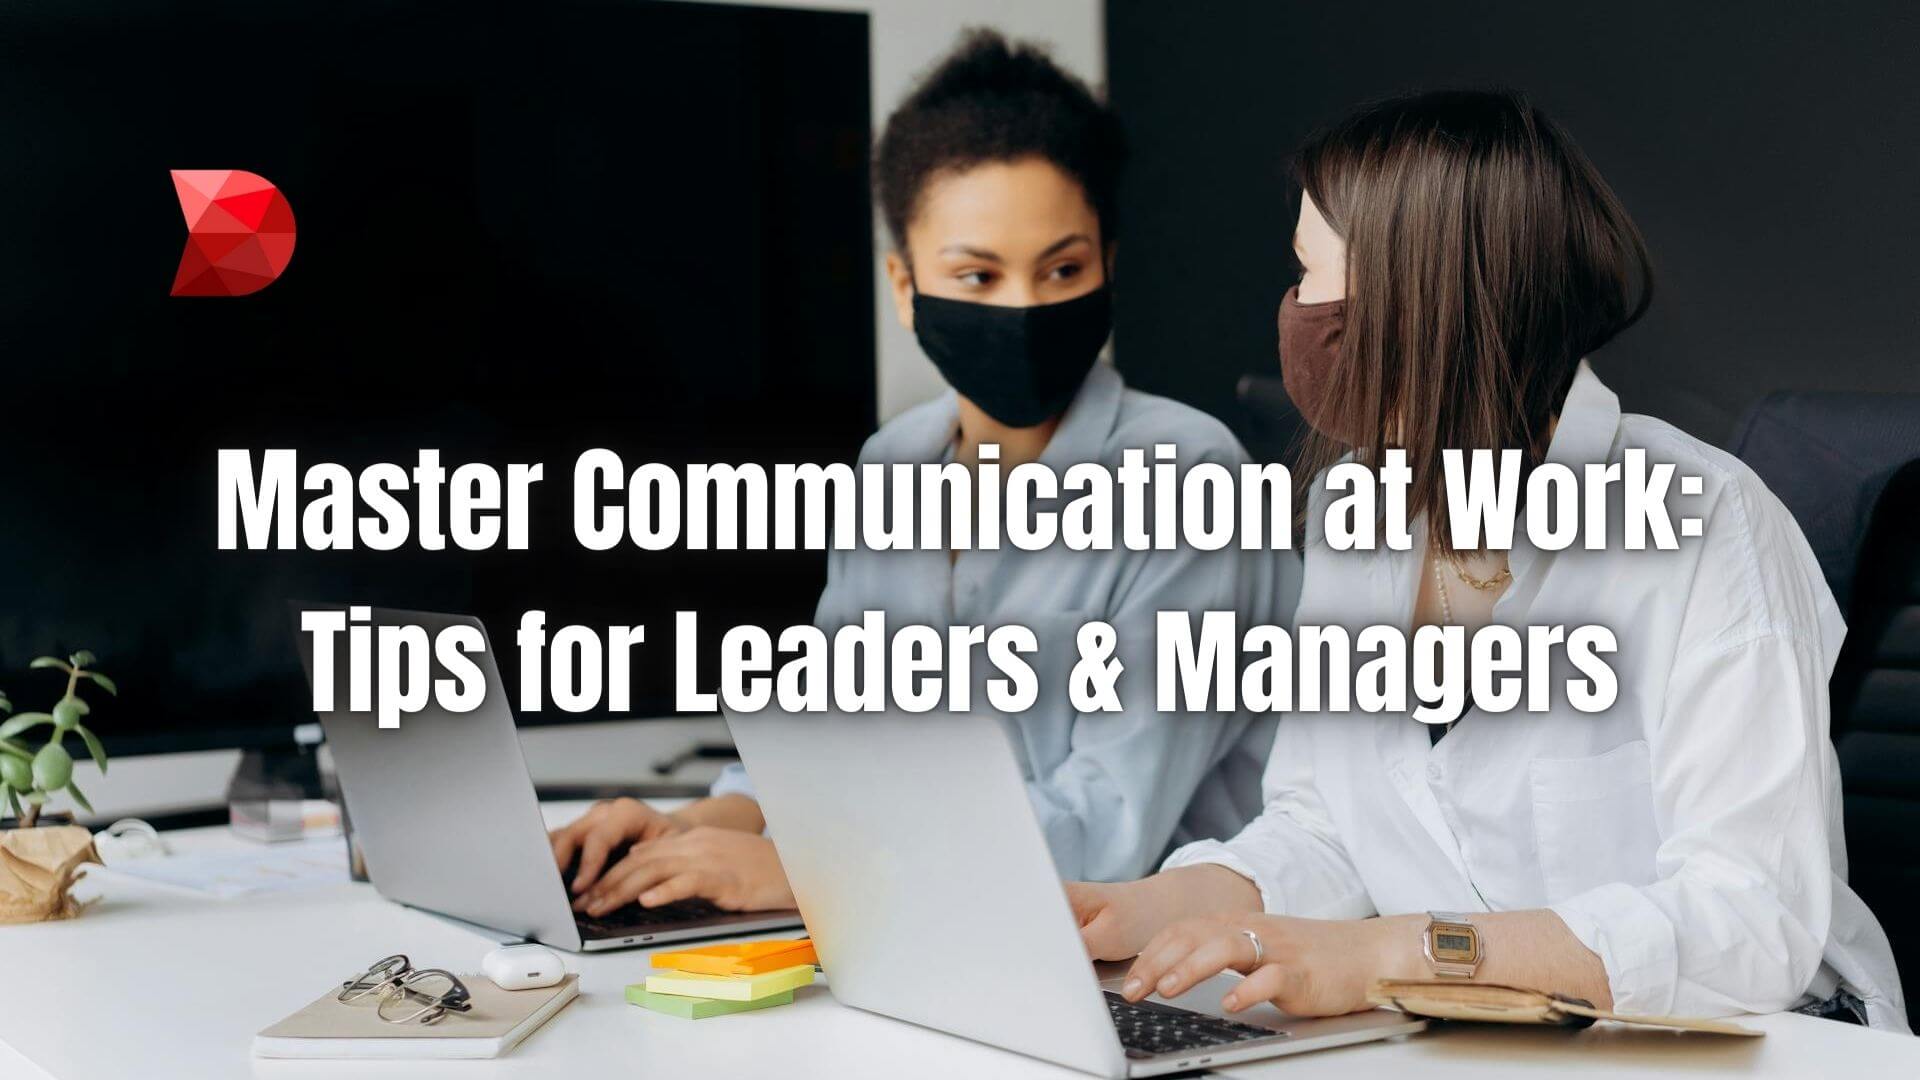 Transform workplace dynamics with powerful communication styles! Click here to learn tips for leaders to build trust and facilitate growth.